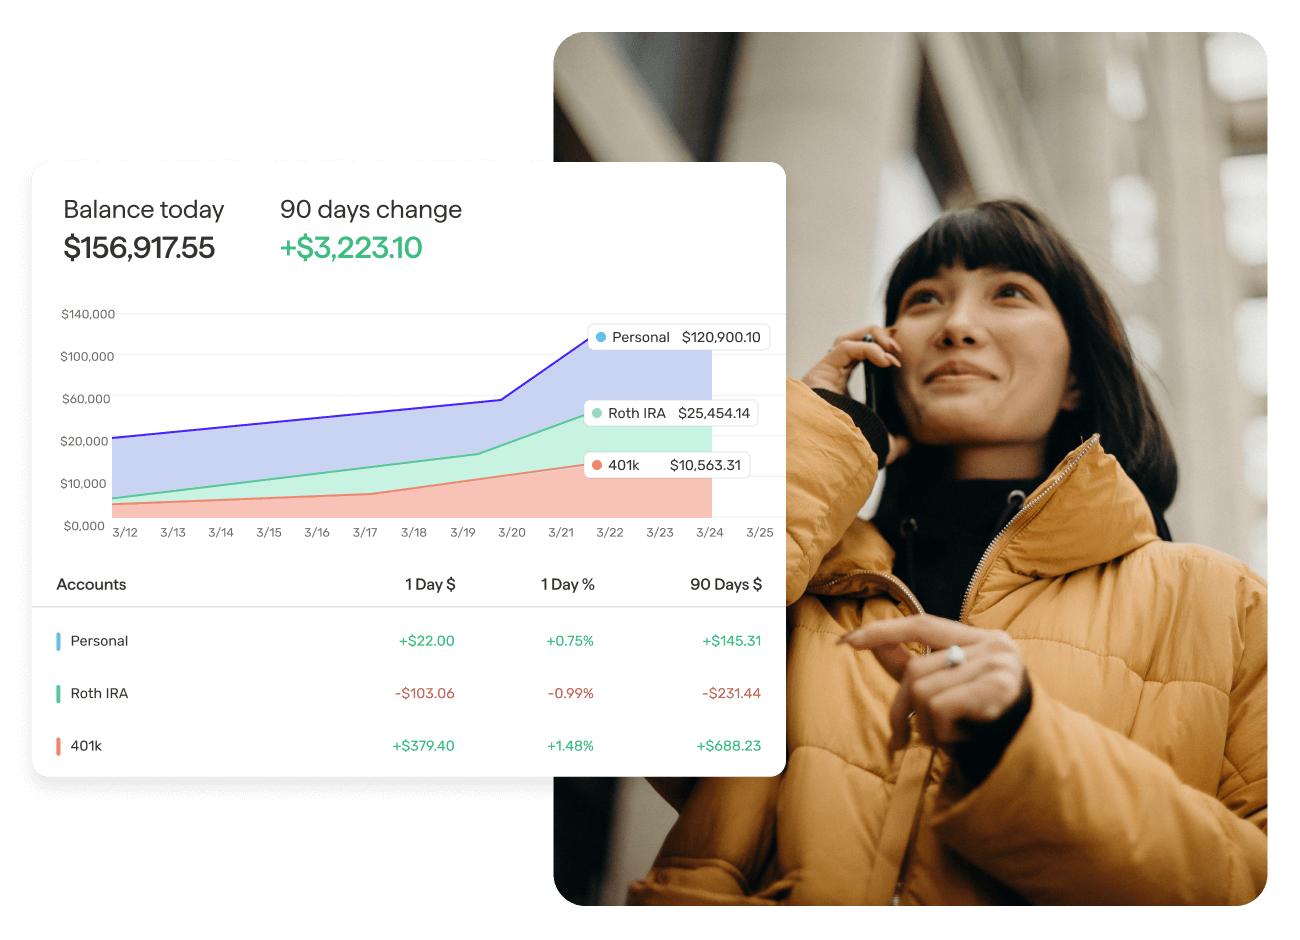 A woman is smiling while on a phone call with Quicken investment charts user interface overlayed to the side